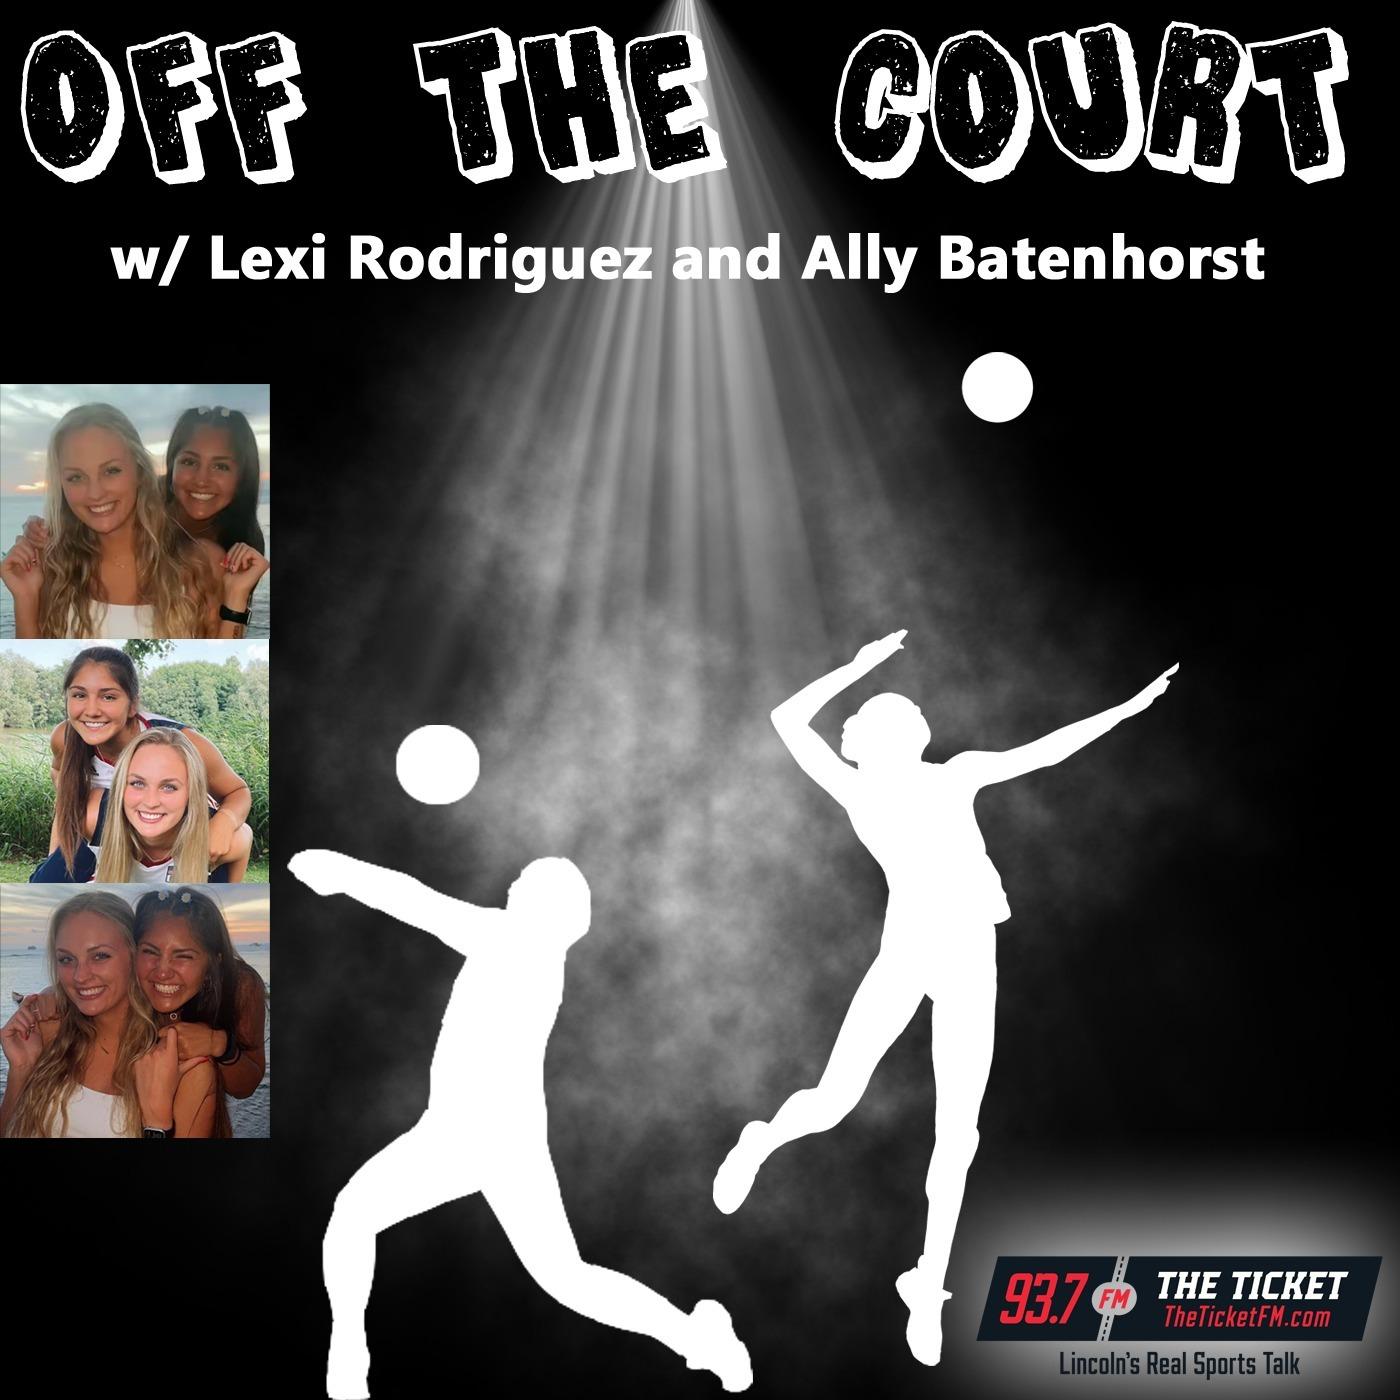 Off the Court w/ Lexi Rodriguez and Ally Batenhorst - 93.7 The Ticket KNTK